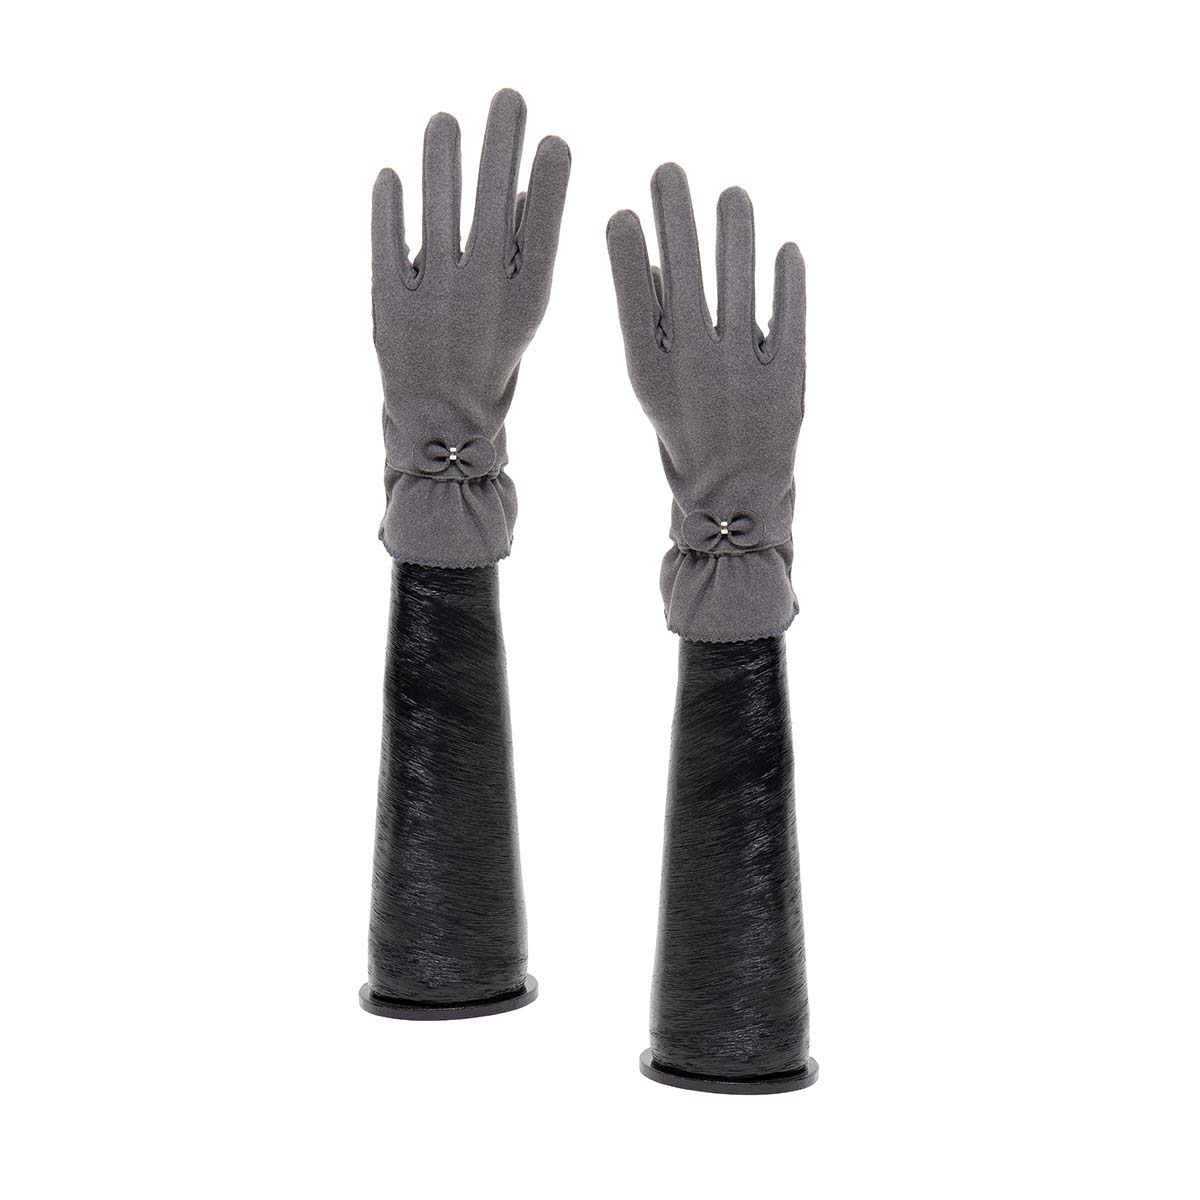 Grey Gloves with Bow and Ruffle